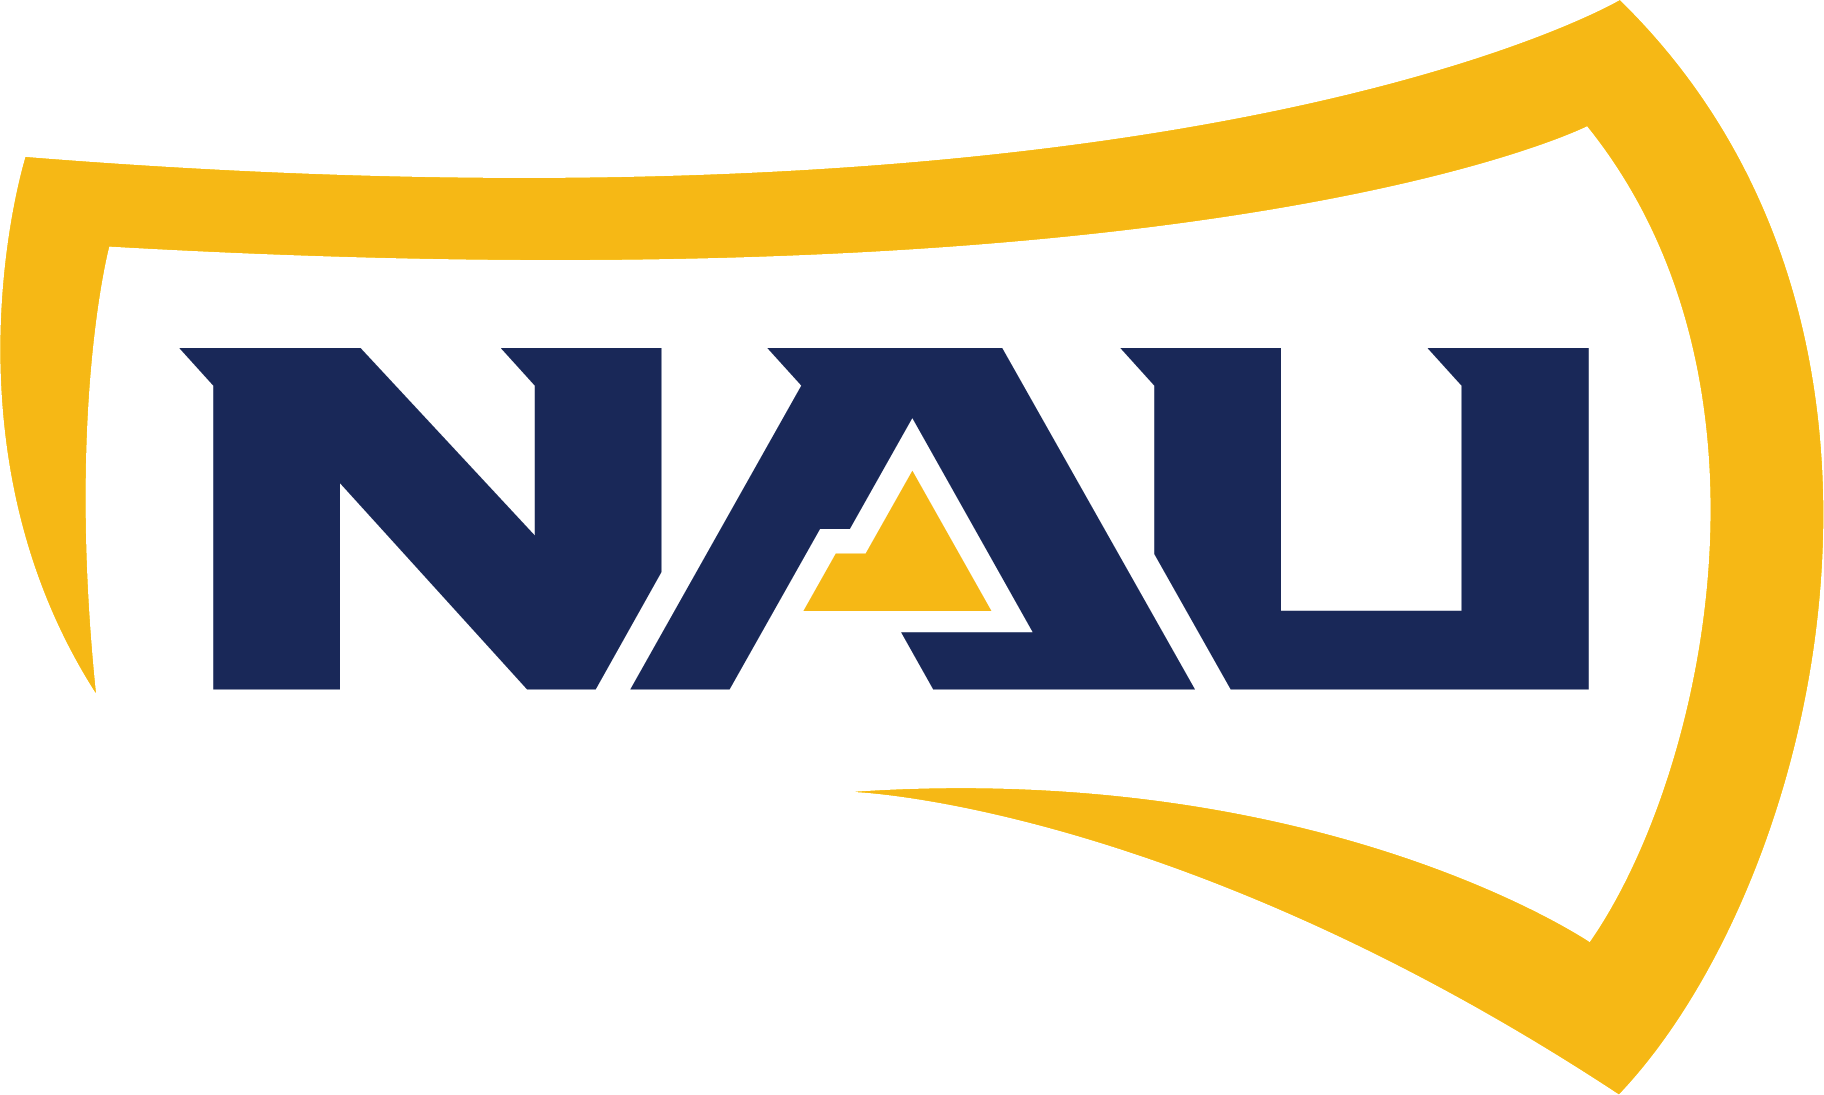 Northern Arizona University's primary axe logo, featuring true blue and gold.